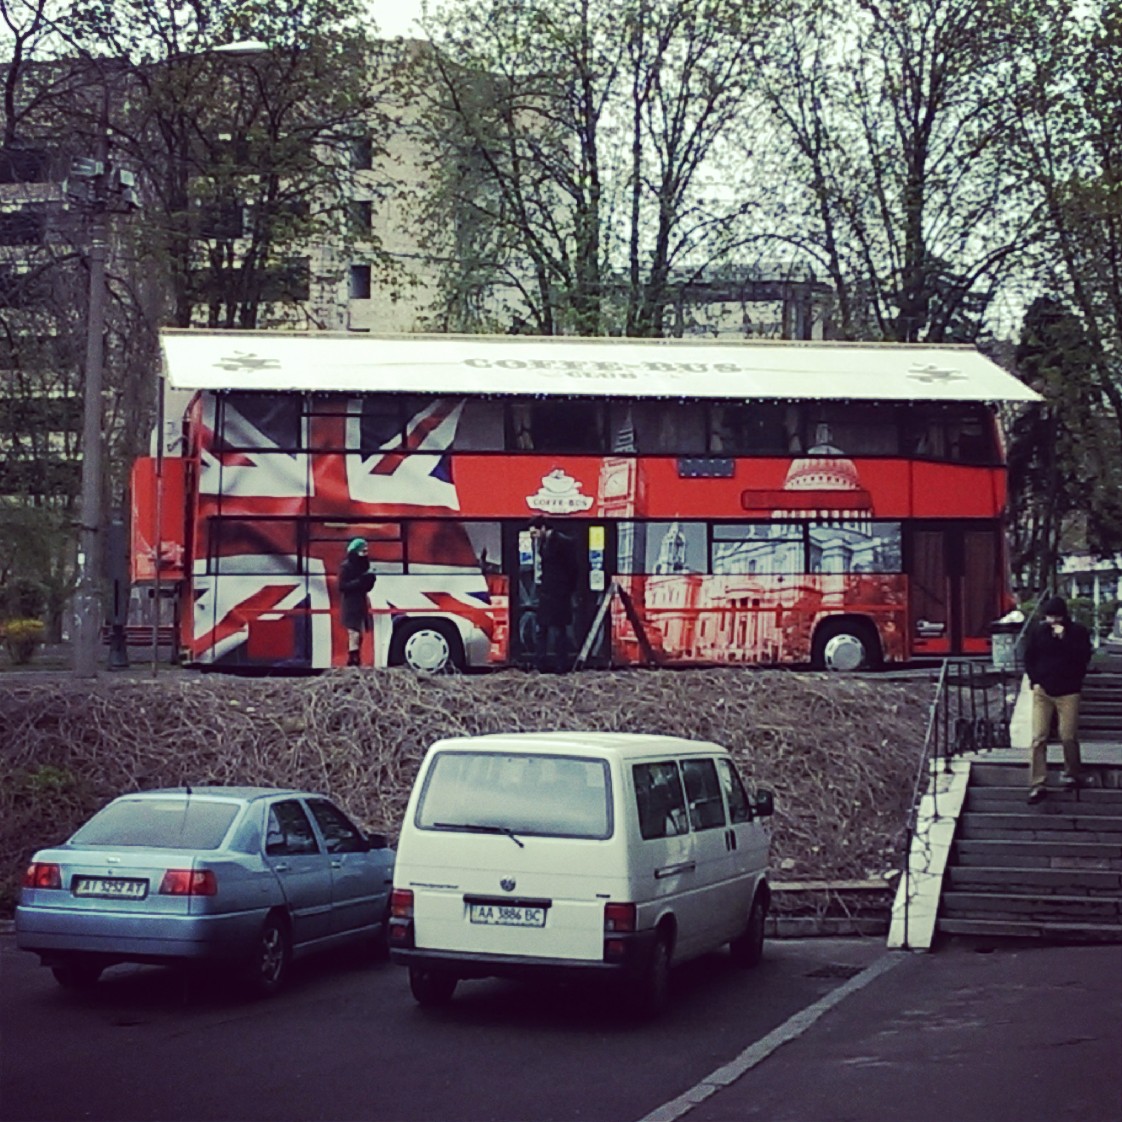 ...and now look!! (and I know we're famous for Red buses, but it should be a TEA bus). Where will is end??